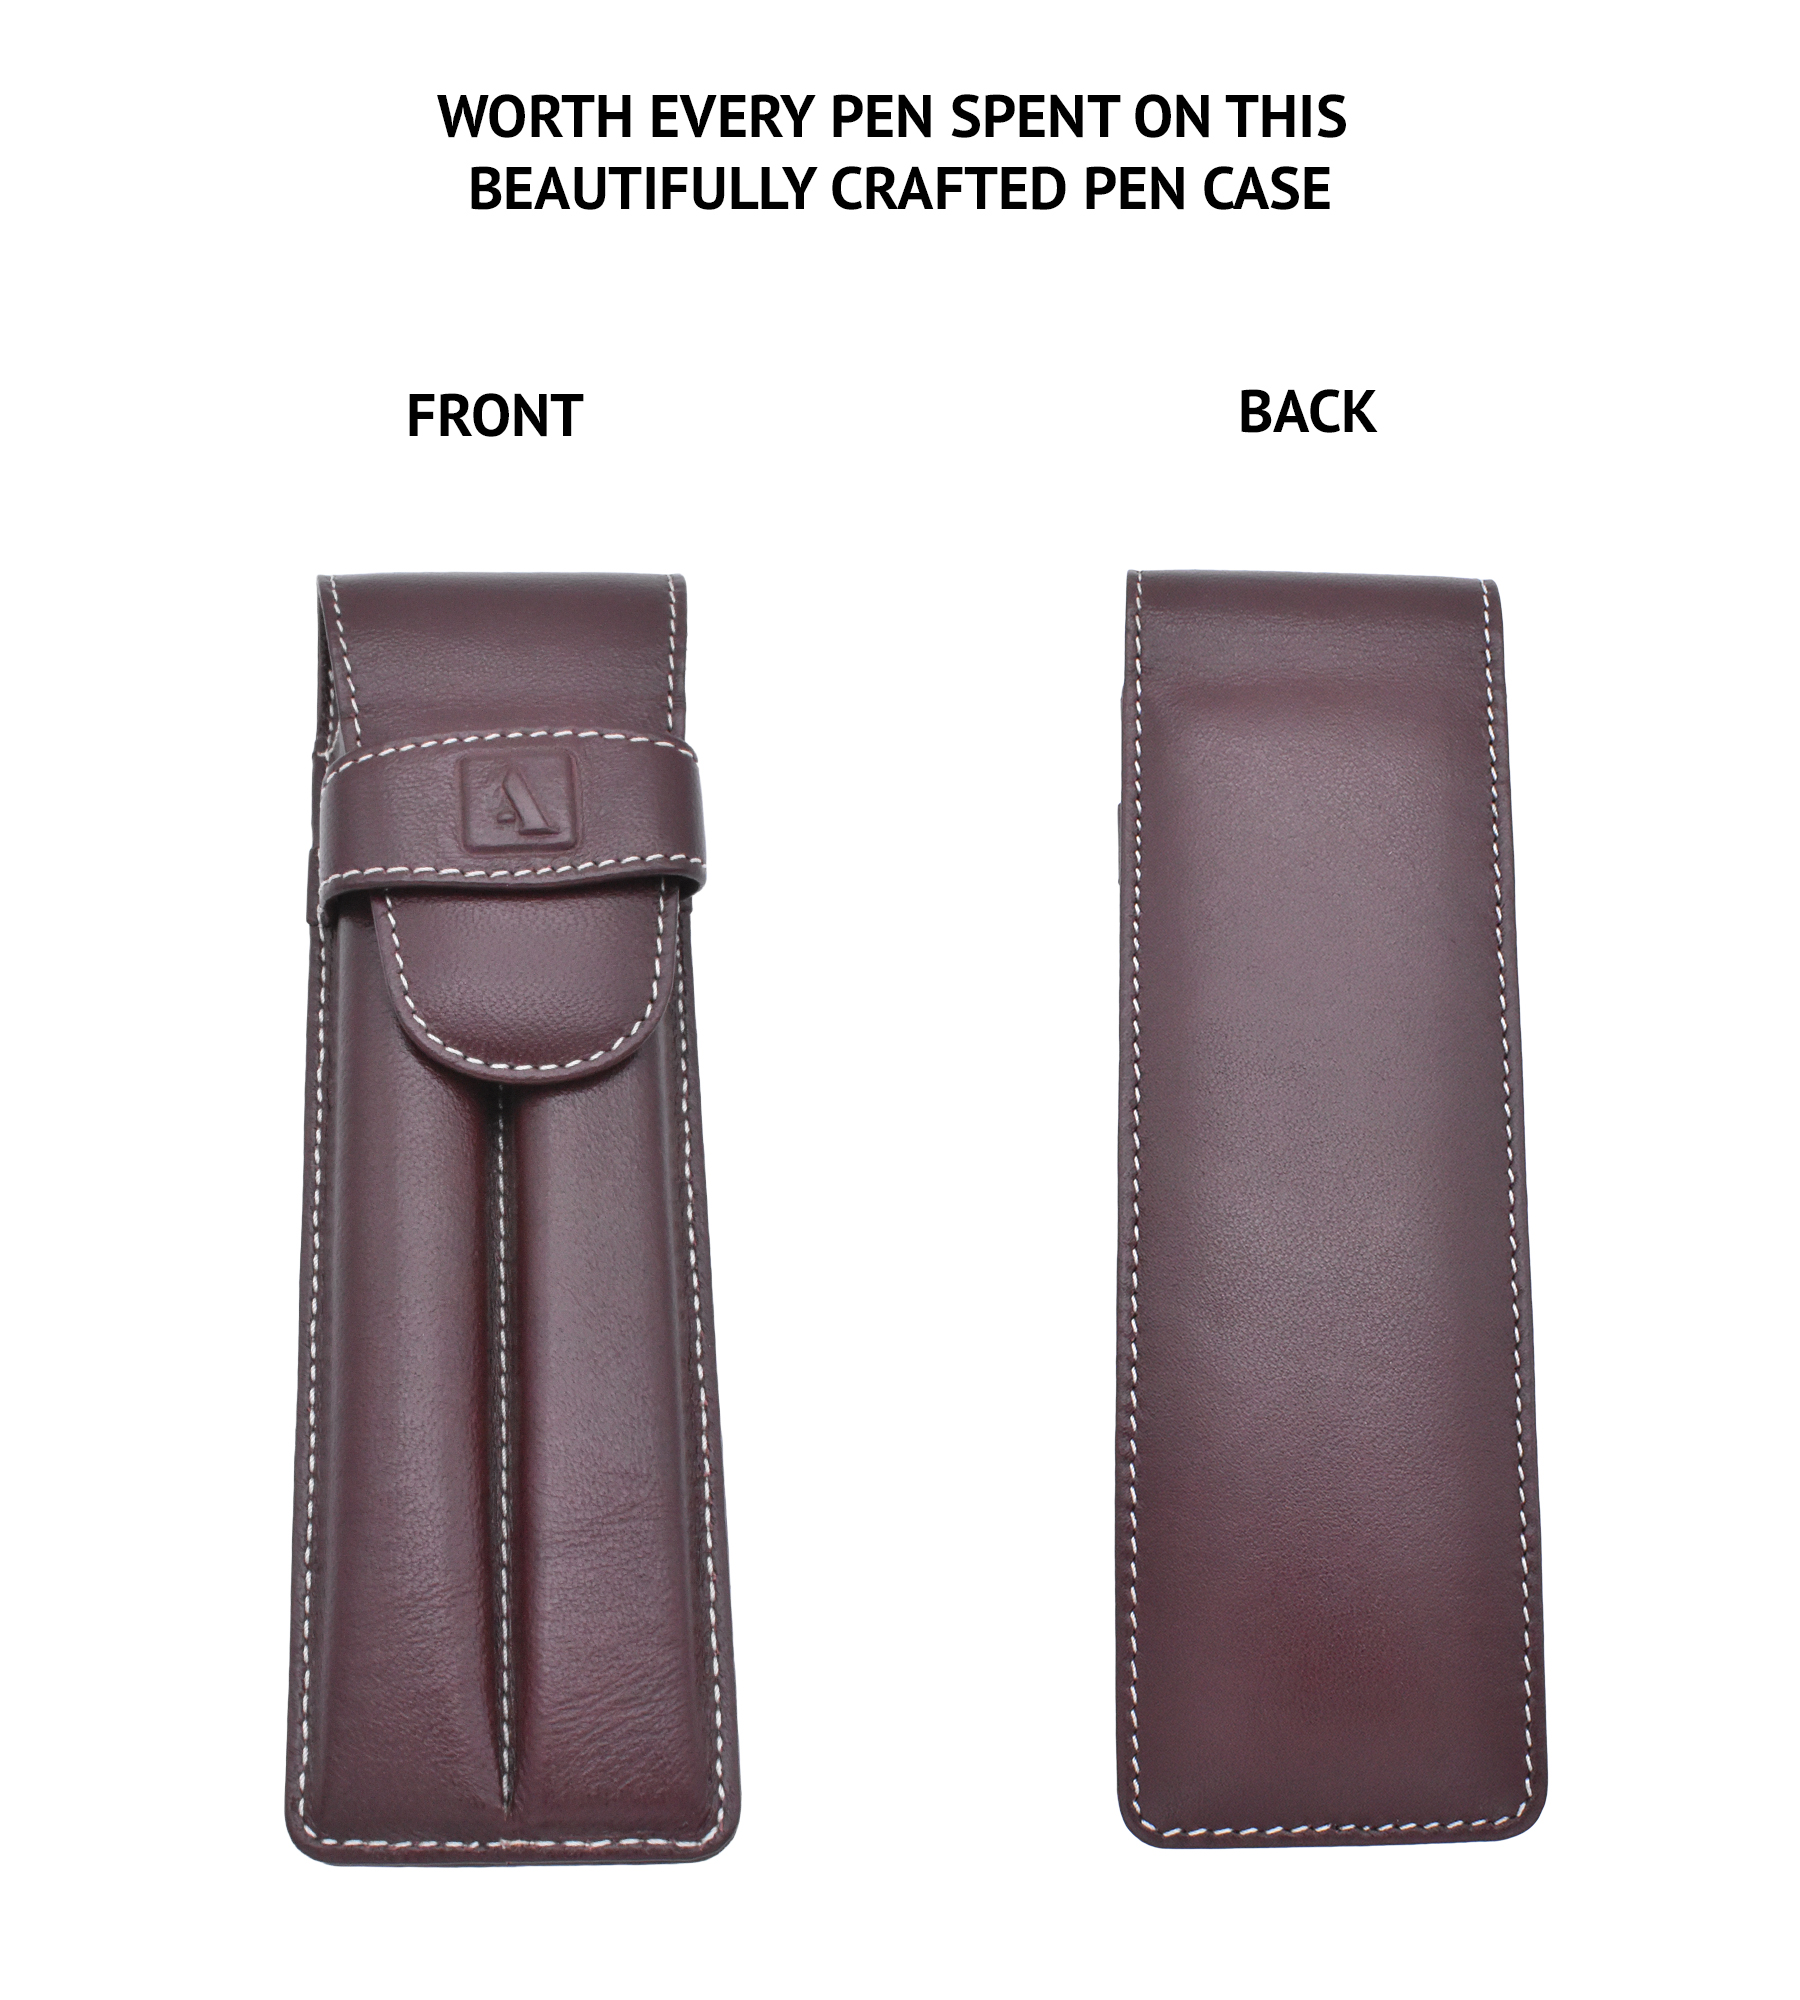 W51--Pen case to carry 2 pens in Genuine Leather - Wine